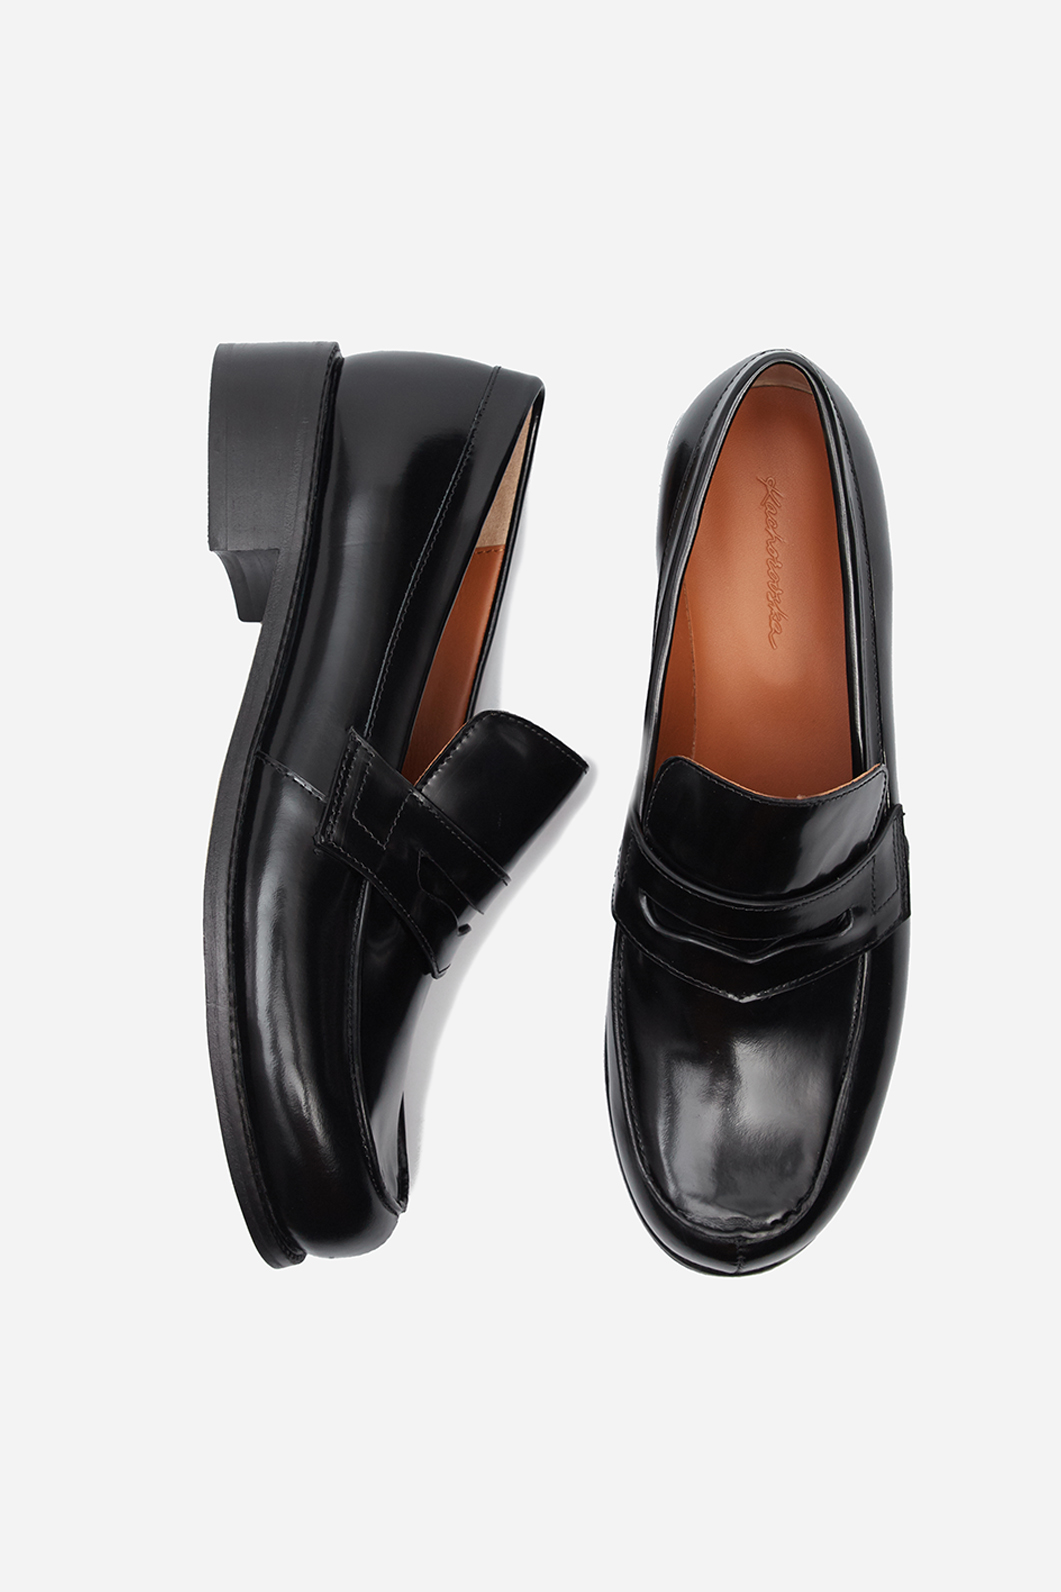 Alen black shiny loafers leather sole